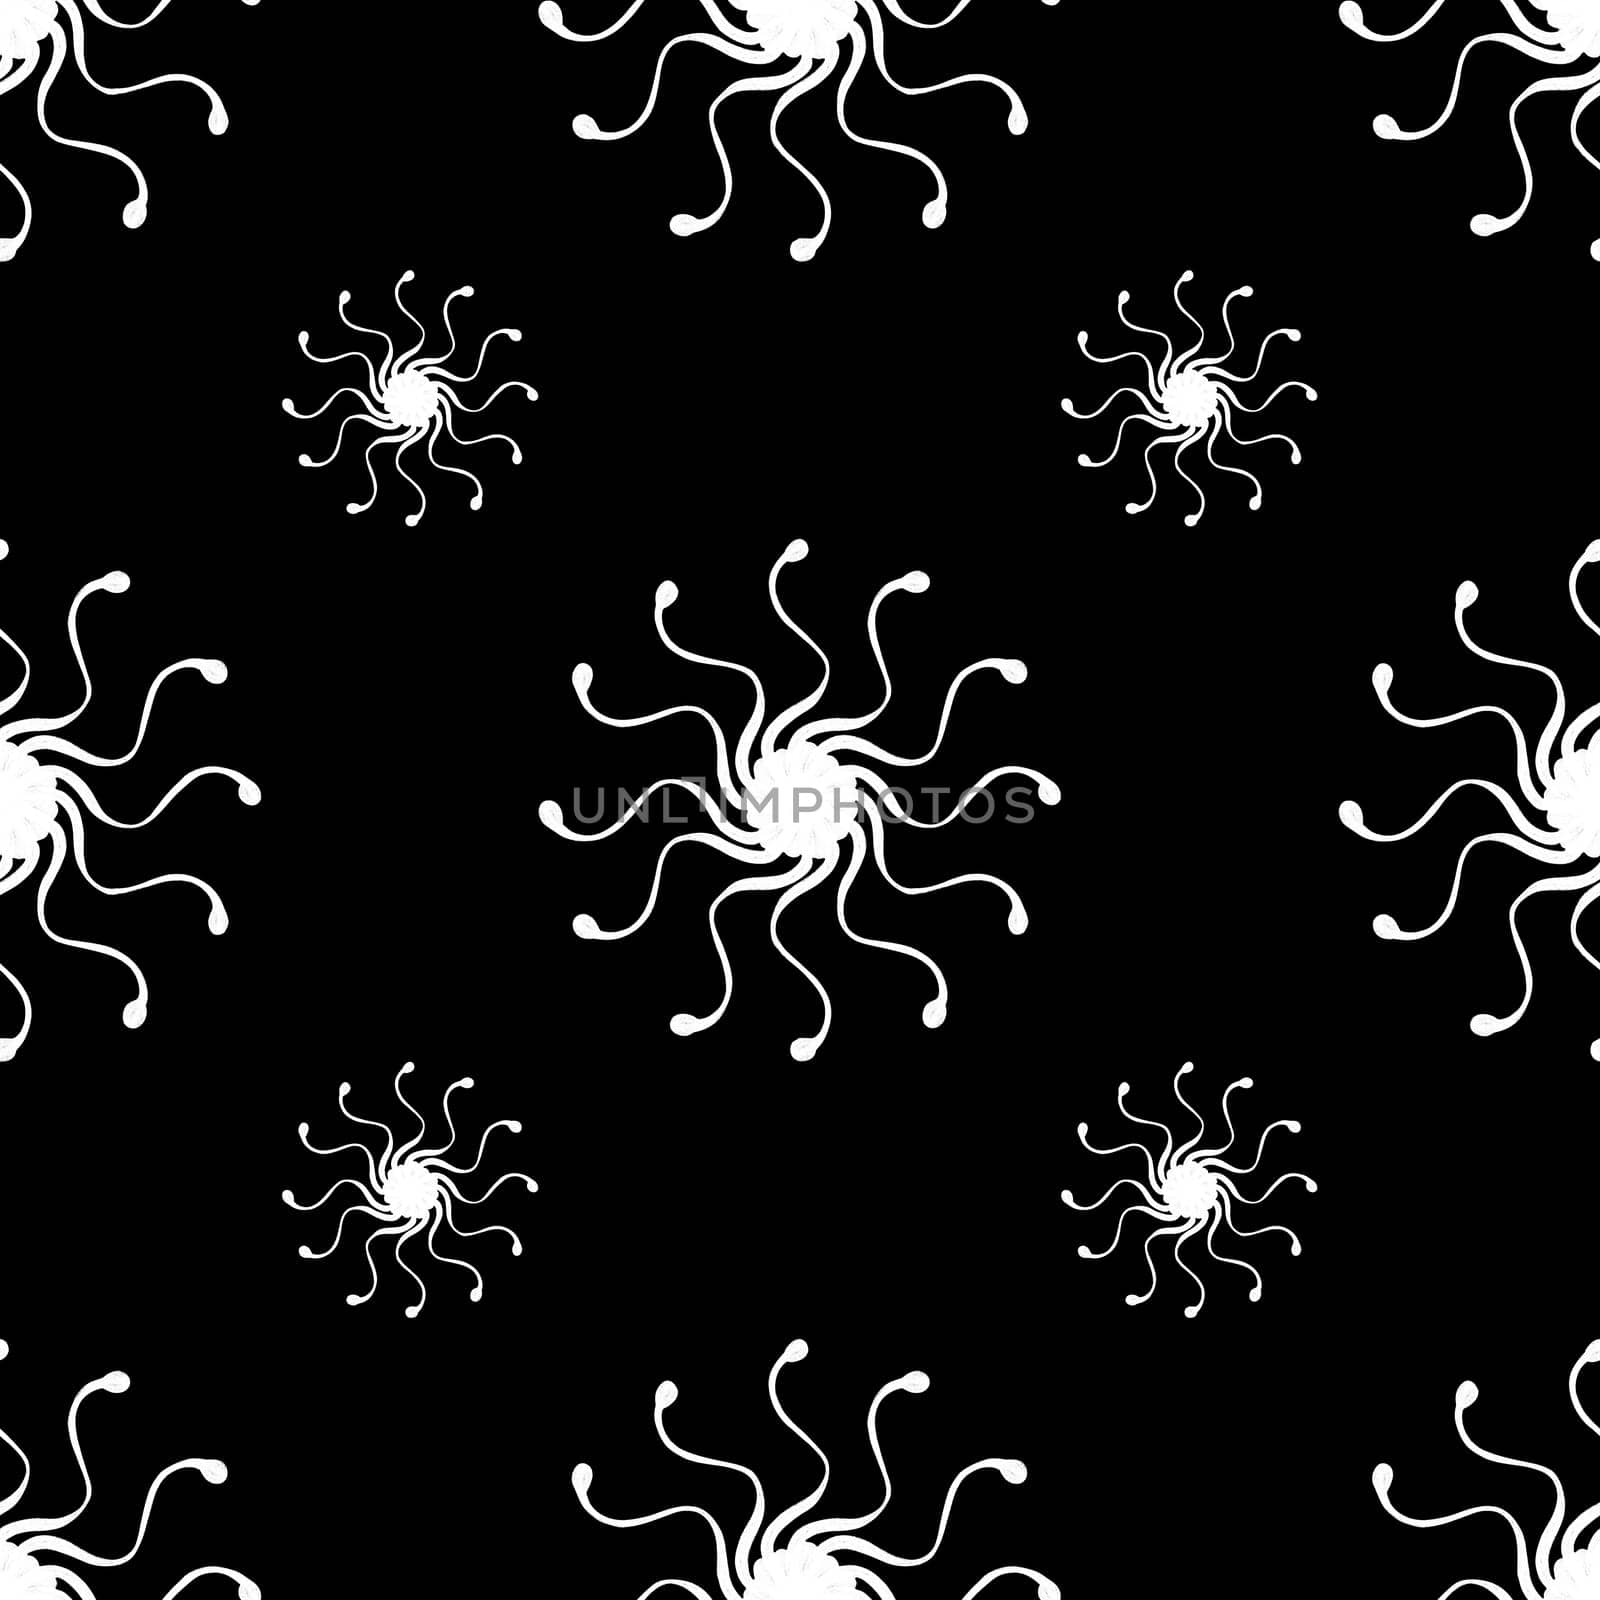 Black and White Seamless Pattern with Hand Drawn Snowflakes. Digital Paper with Snowflakes Drawn by Colored Pencils. Winter Seamless Background for Christmas, New Year, Xmas.